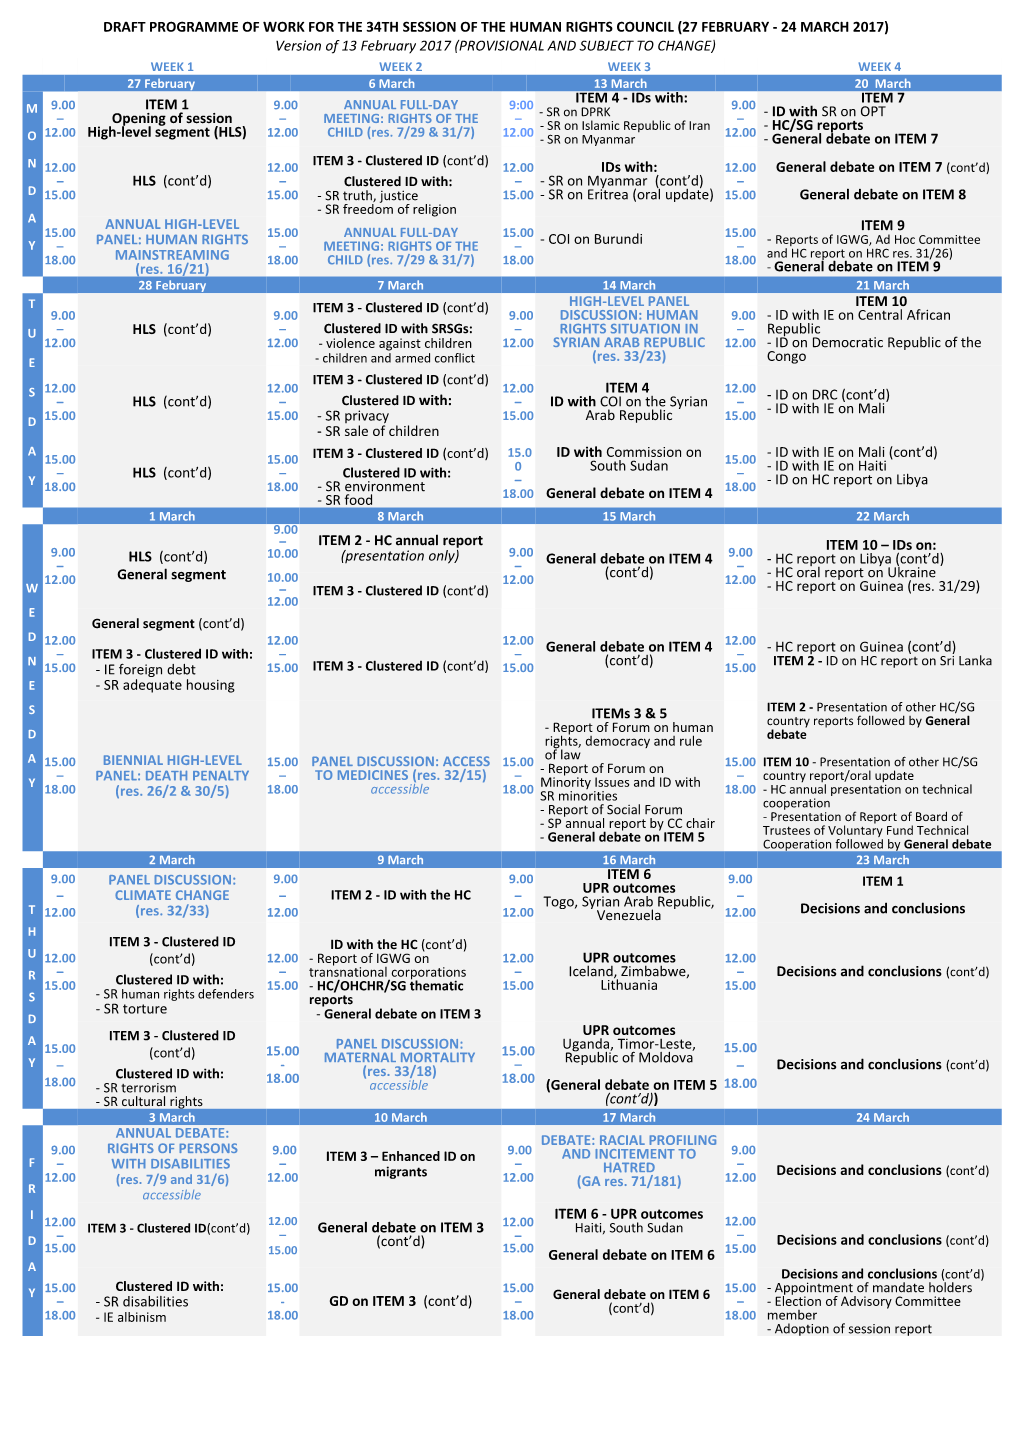 Programme of Work for the 34Th Session of the Human Rights Council in English